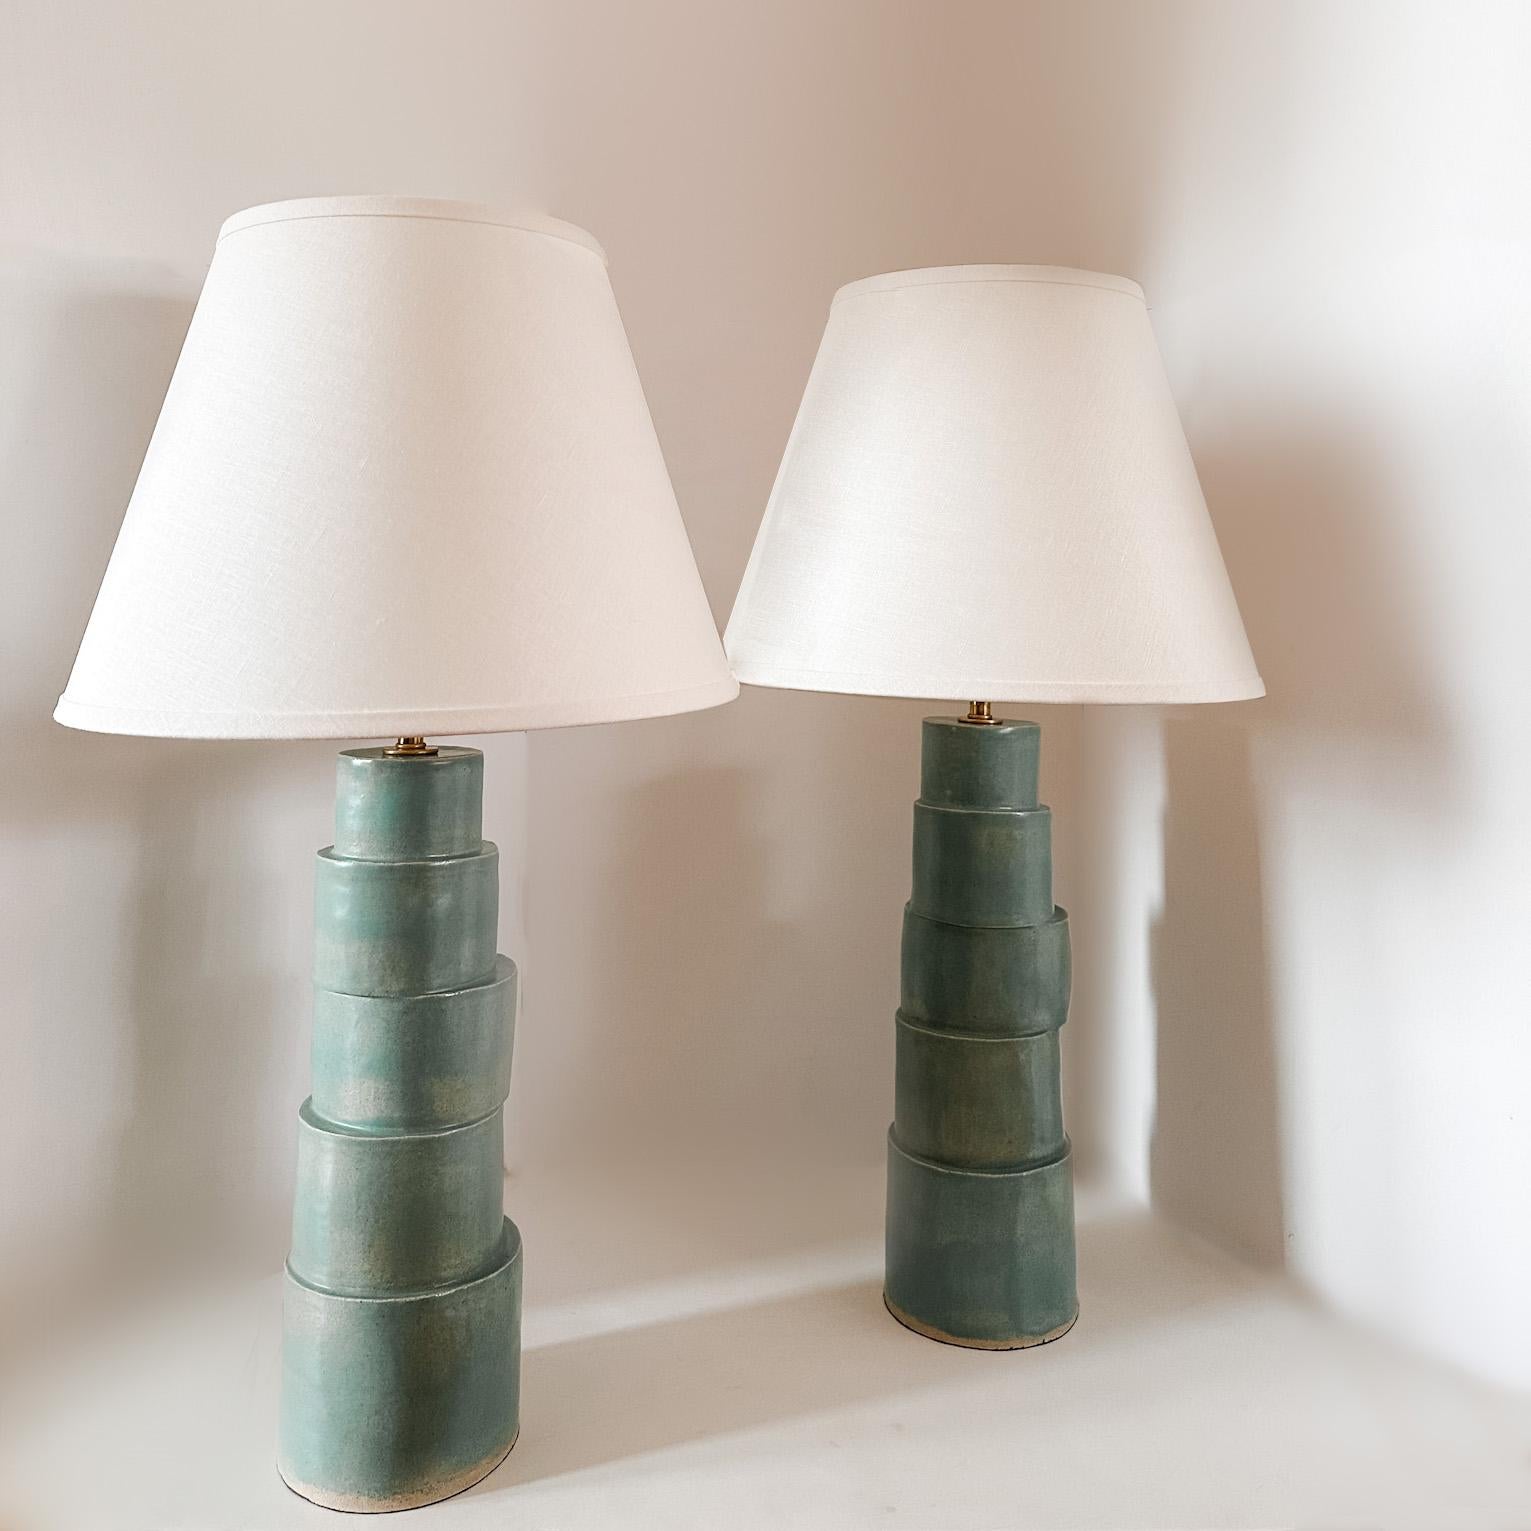 The Stacked column table lamp is handmade in raku clay in a turquoise glaze with brass components, silver fabric cord, and an ivory linen shade. The repetitive nature and asymmetrical design will bring interest to any modern or transitional home.